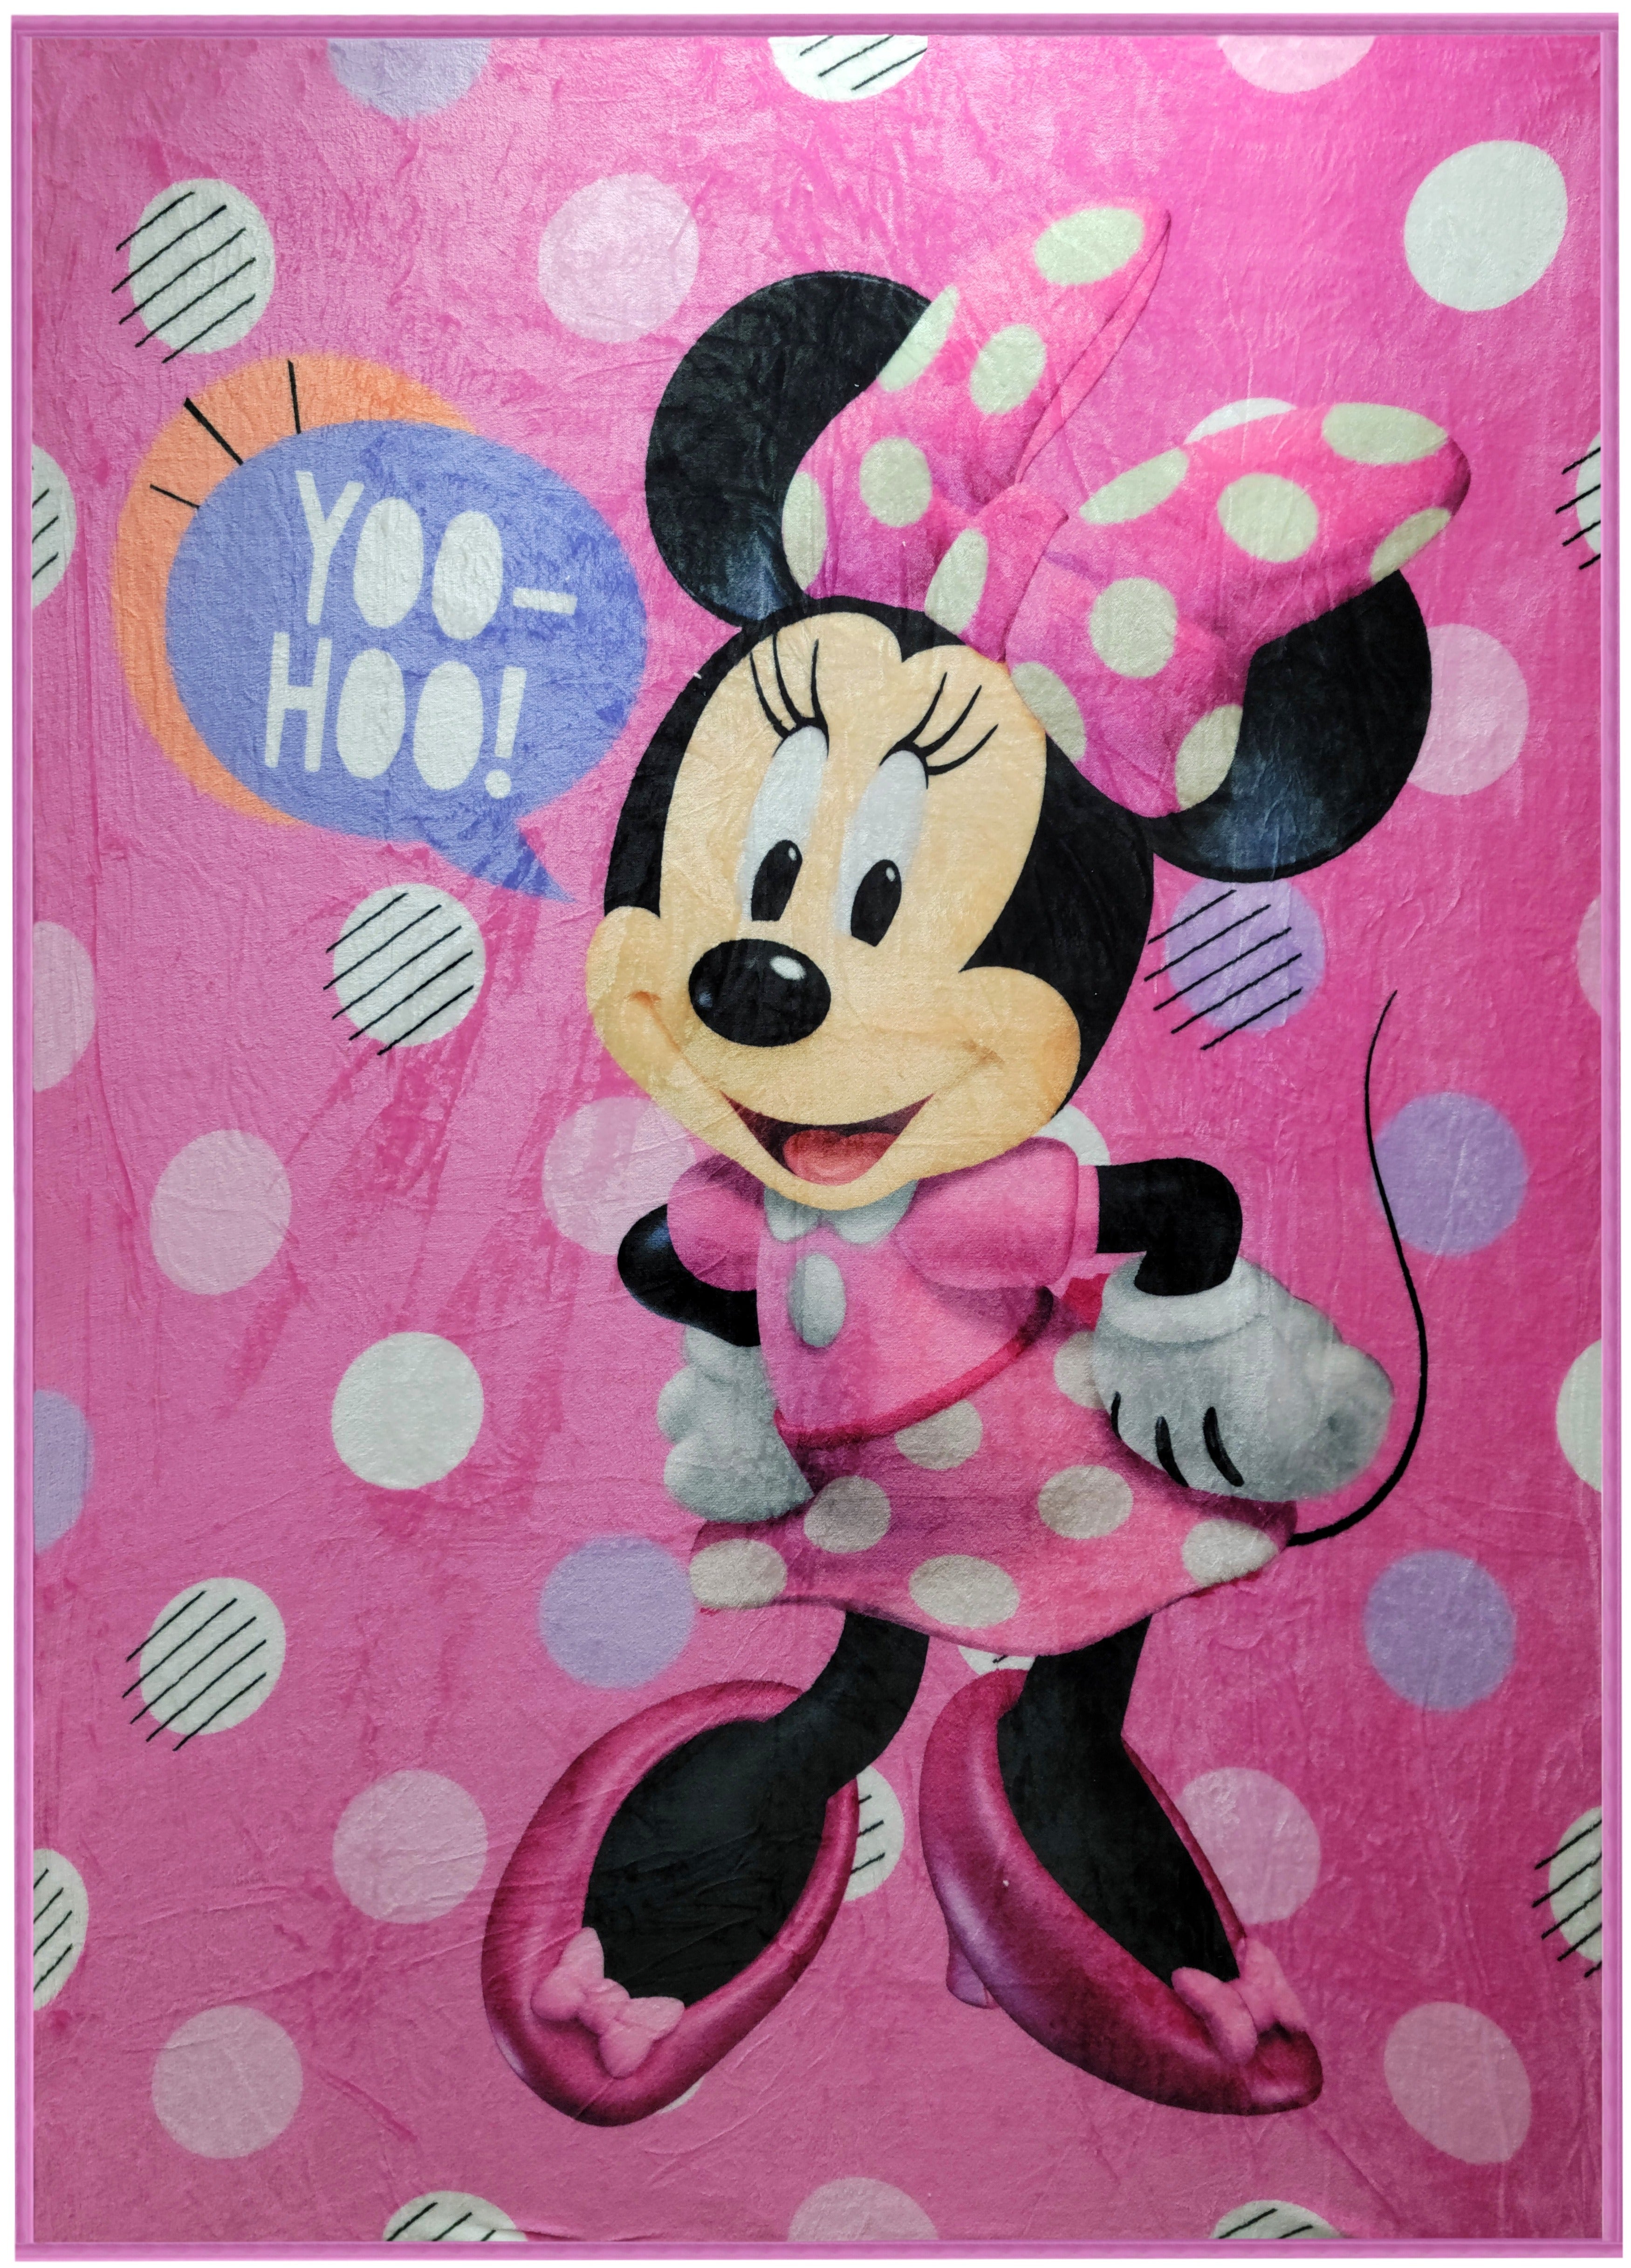 Kids and Toddler Throw Blanket Disney Minnie Mouse. Super Soft and Cozy. 60x80 inches